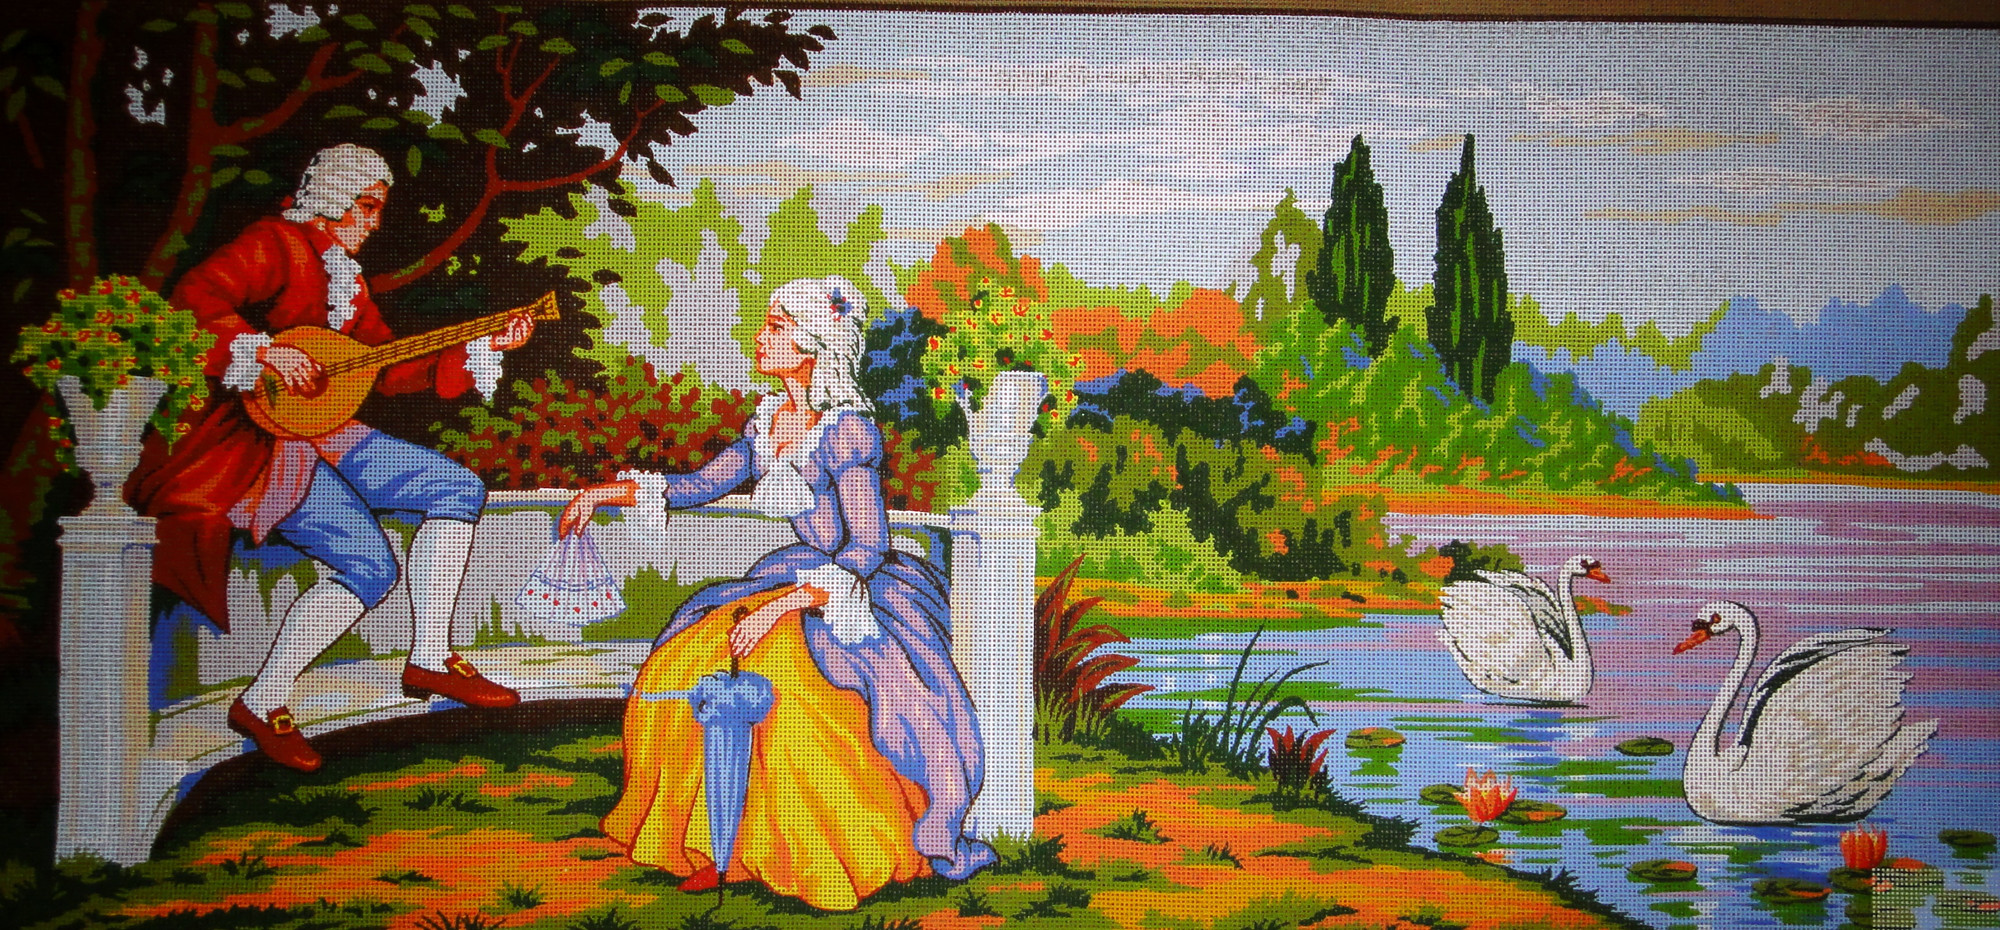 Needlepoint Painted Canvas Counted Cross Stitch Tapestry Kit Gobelin - Lady with Flowers. 18x24 14.848 by Gobelinl